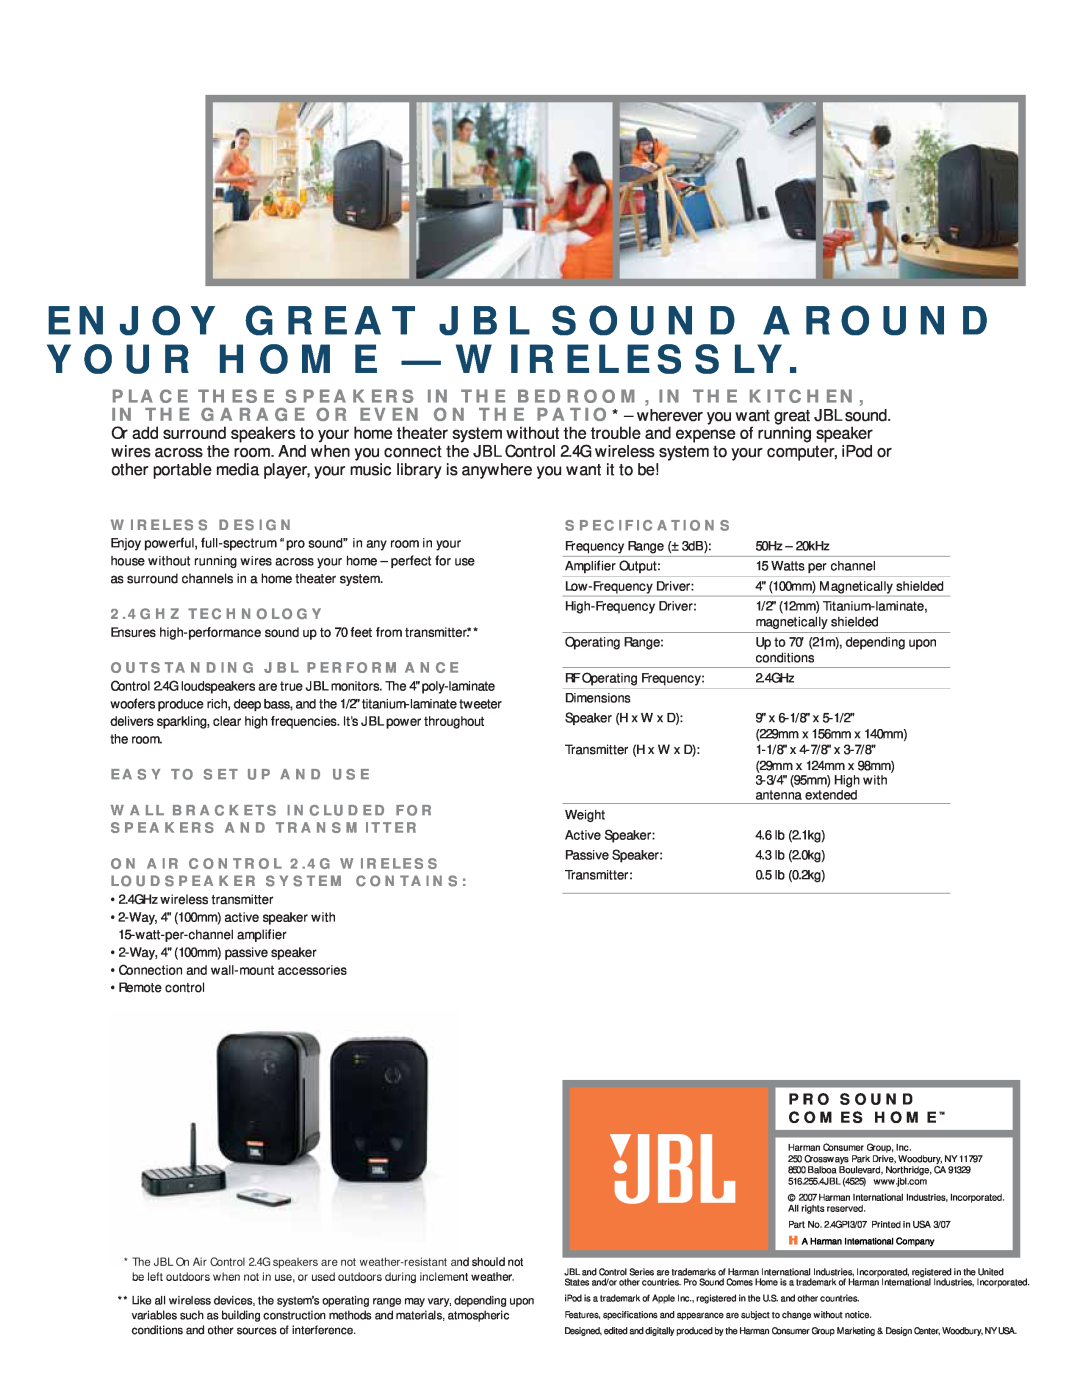 Bolens manual Wireless Design, 2.4GHZ TECHNOLOGY, Outstanding Jbl Performance, Easy To Set Up And Use, Specifications 